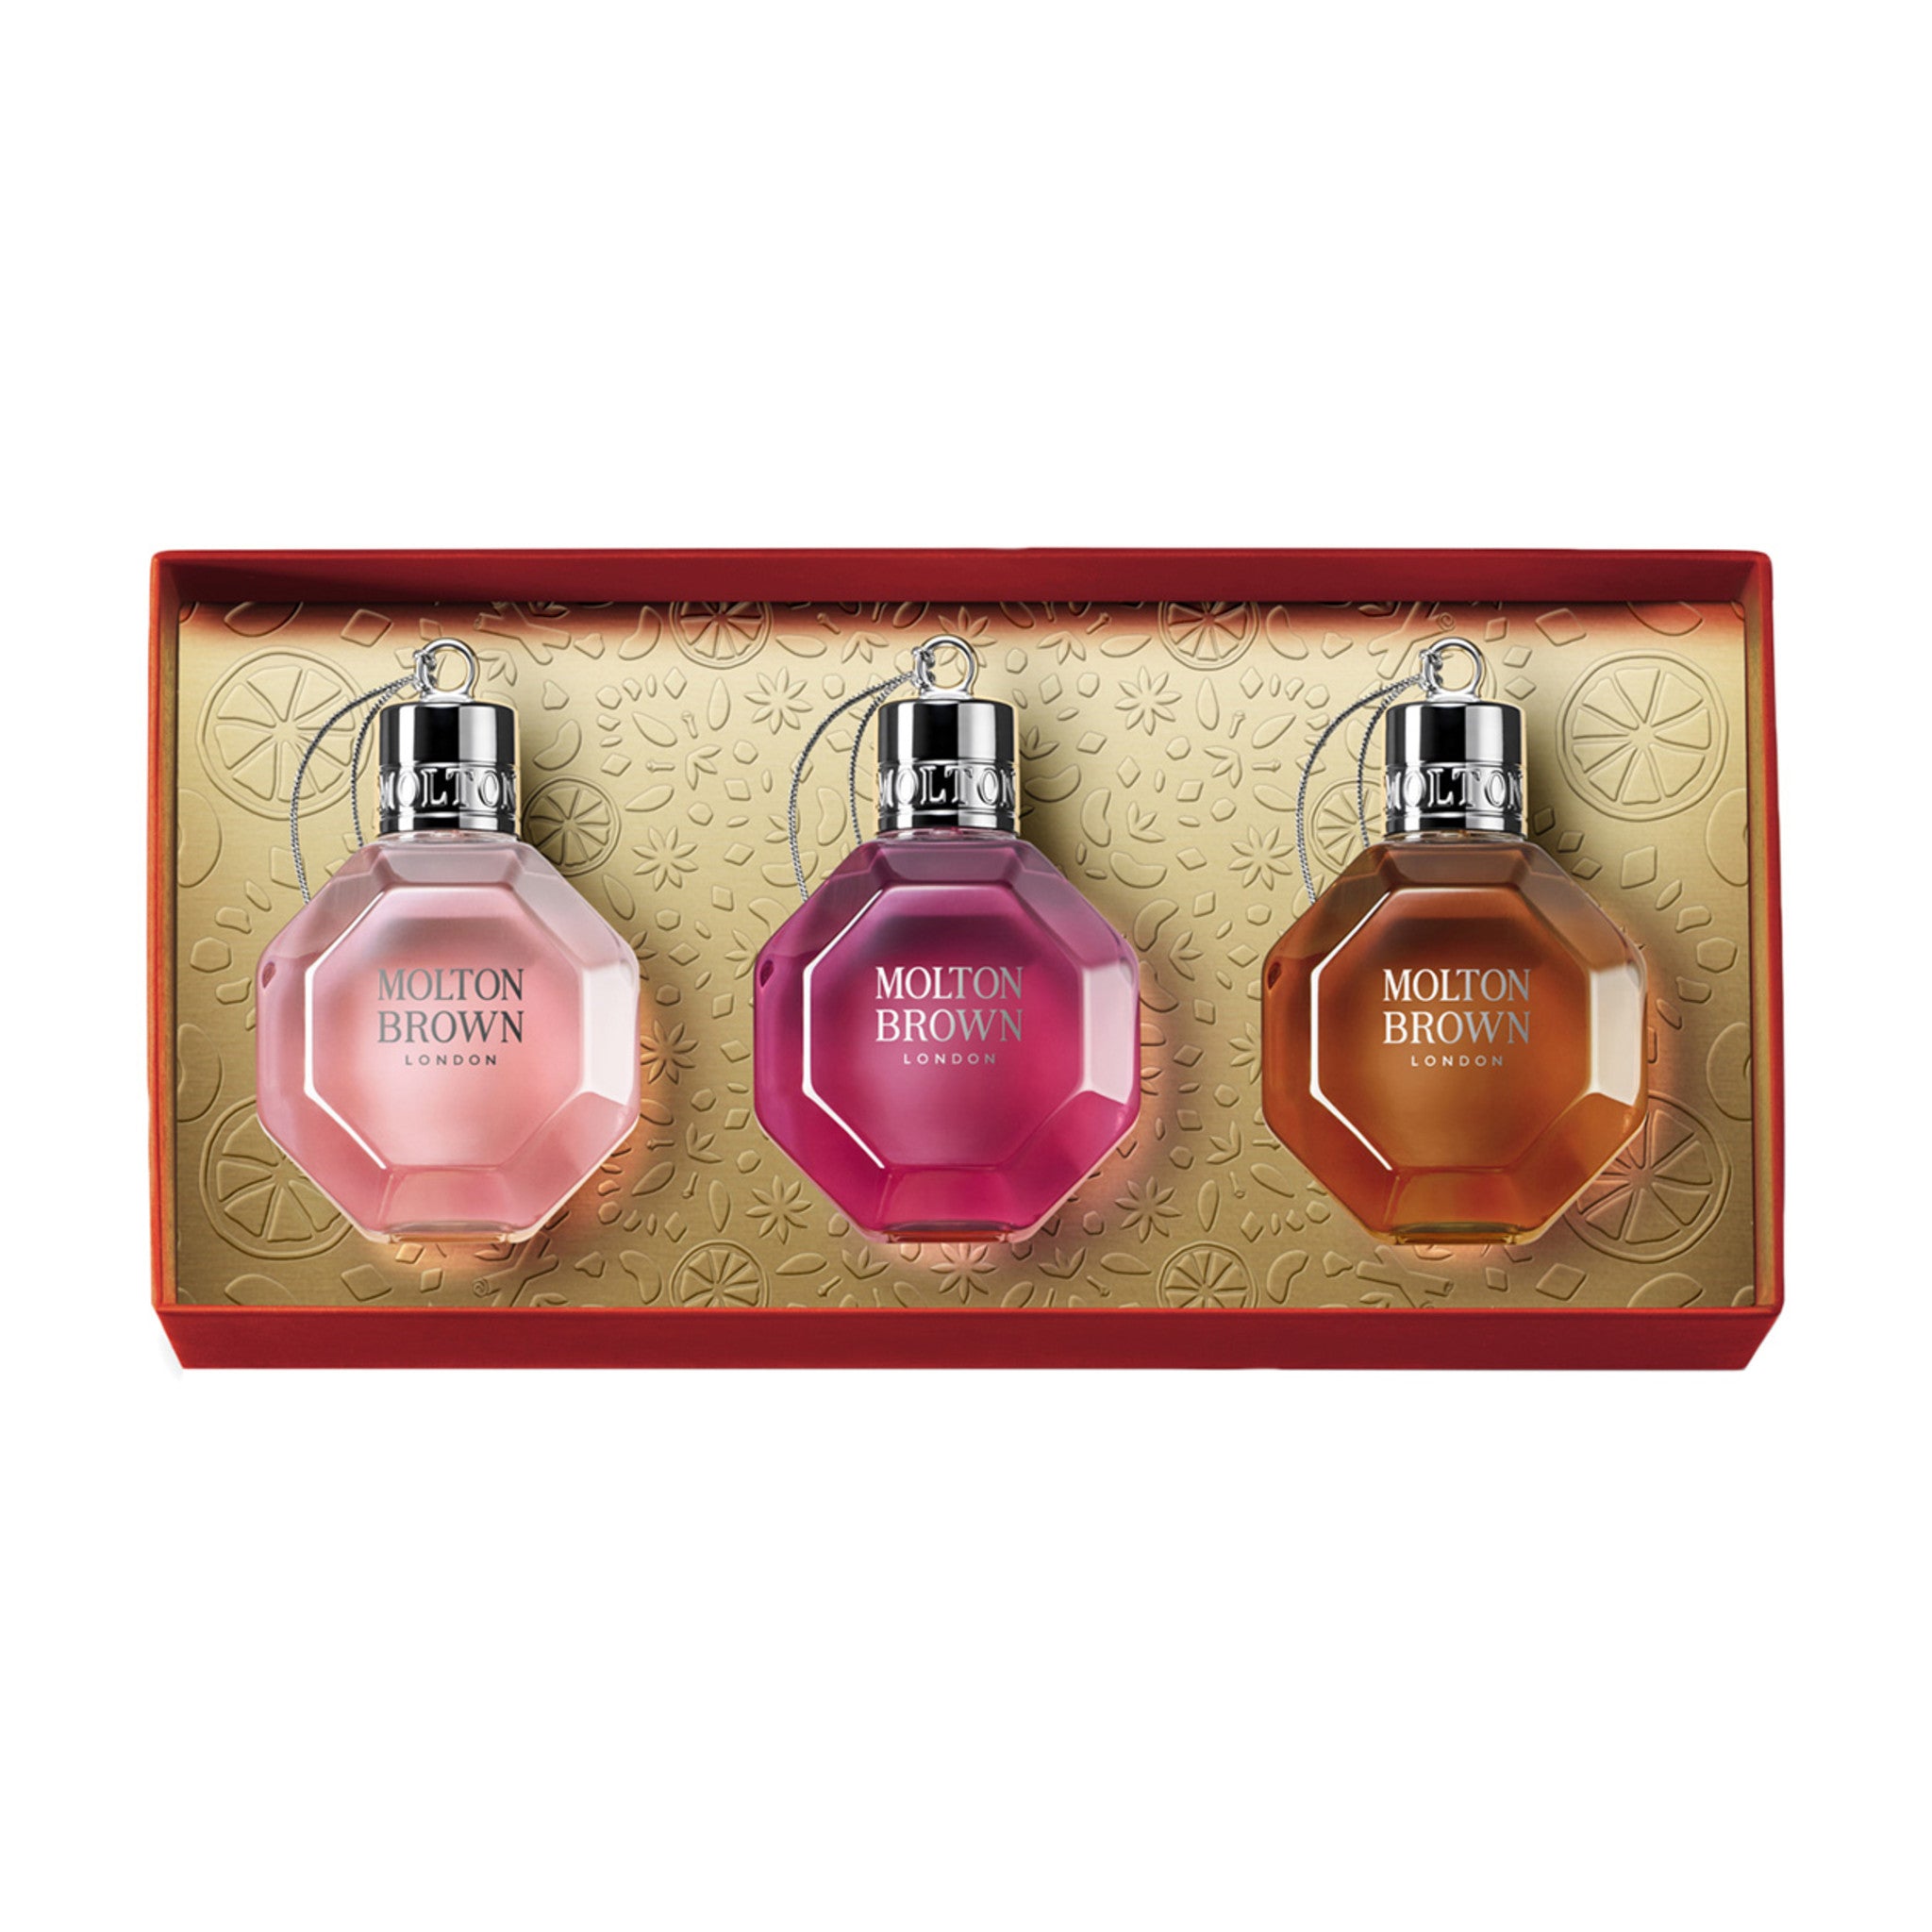 Molton Brown Fiery Pink Pepper Festive Bauble Gift Set